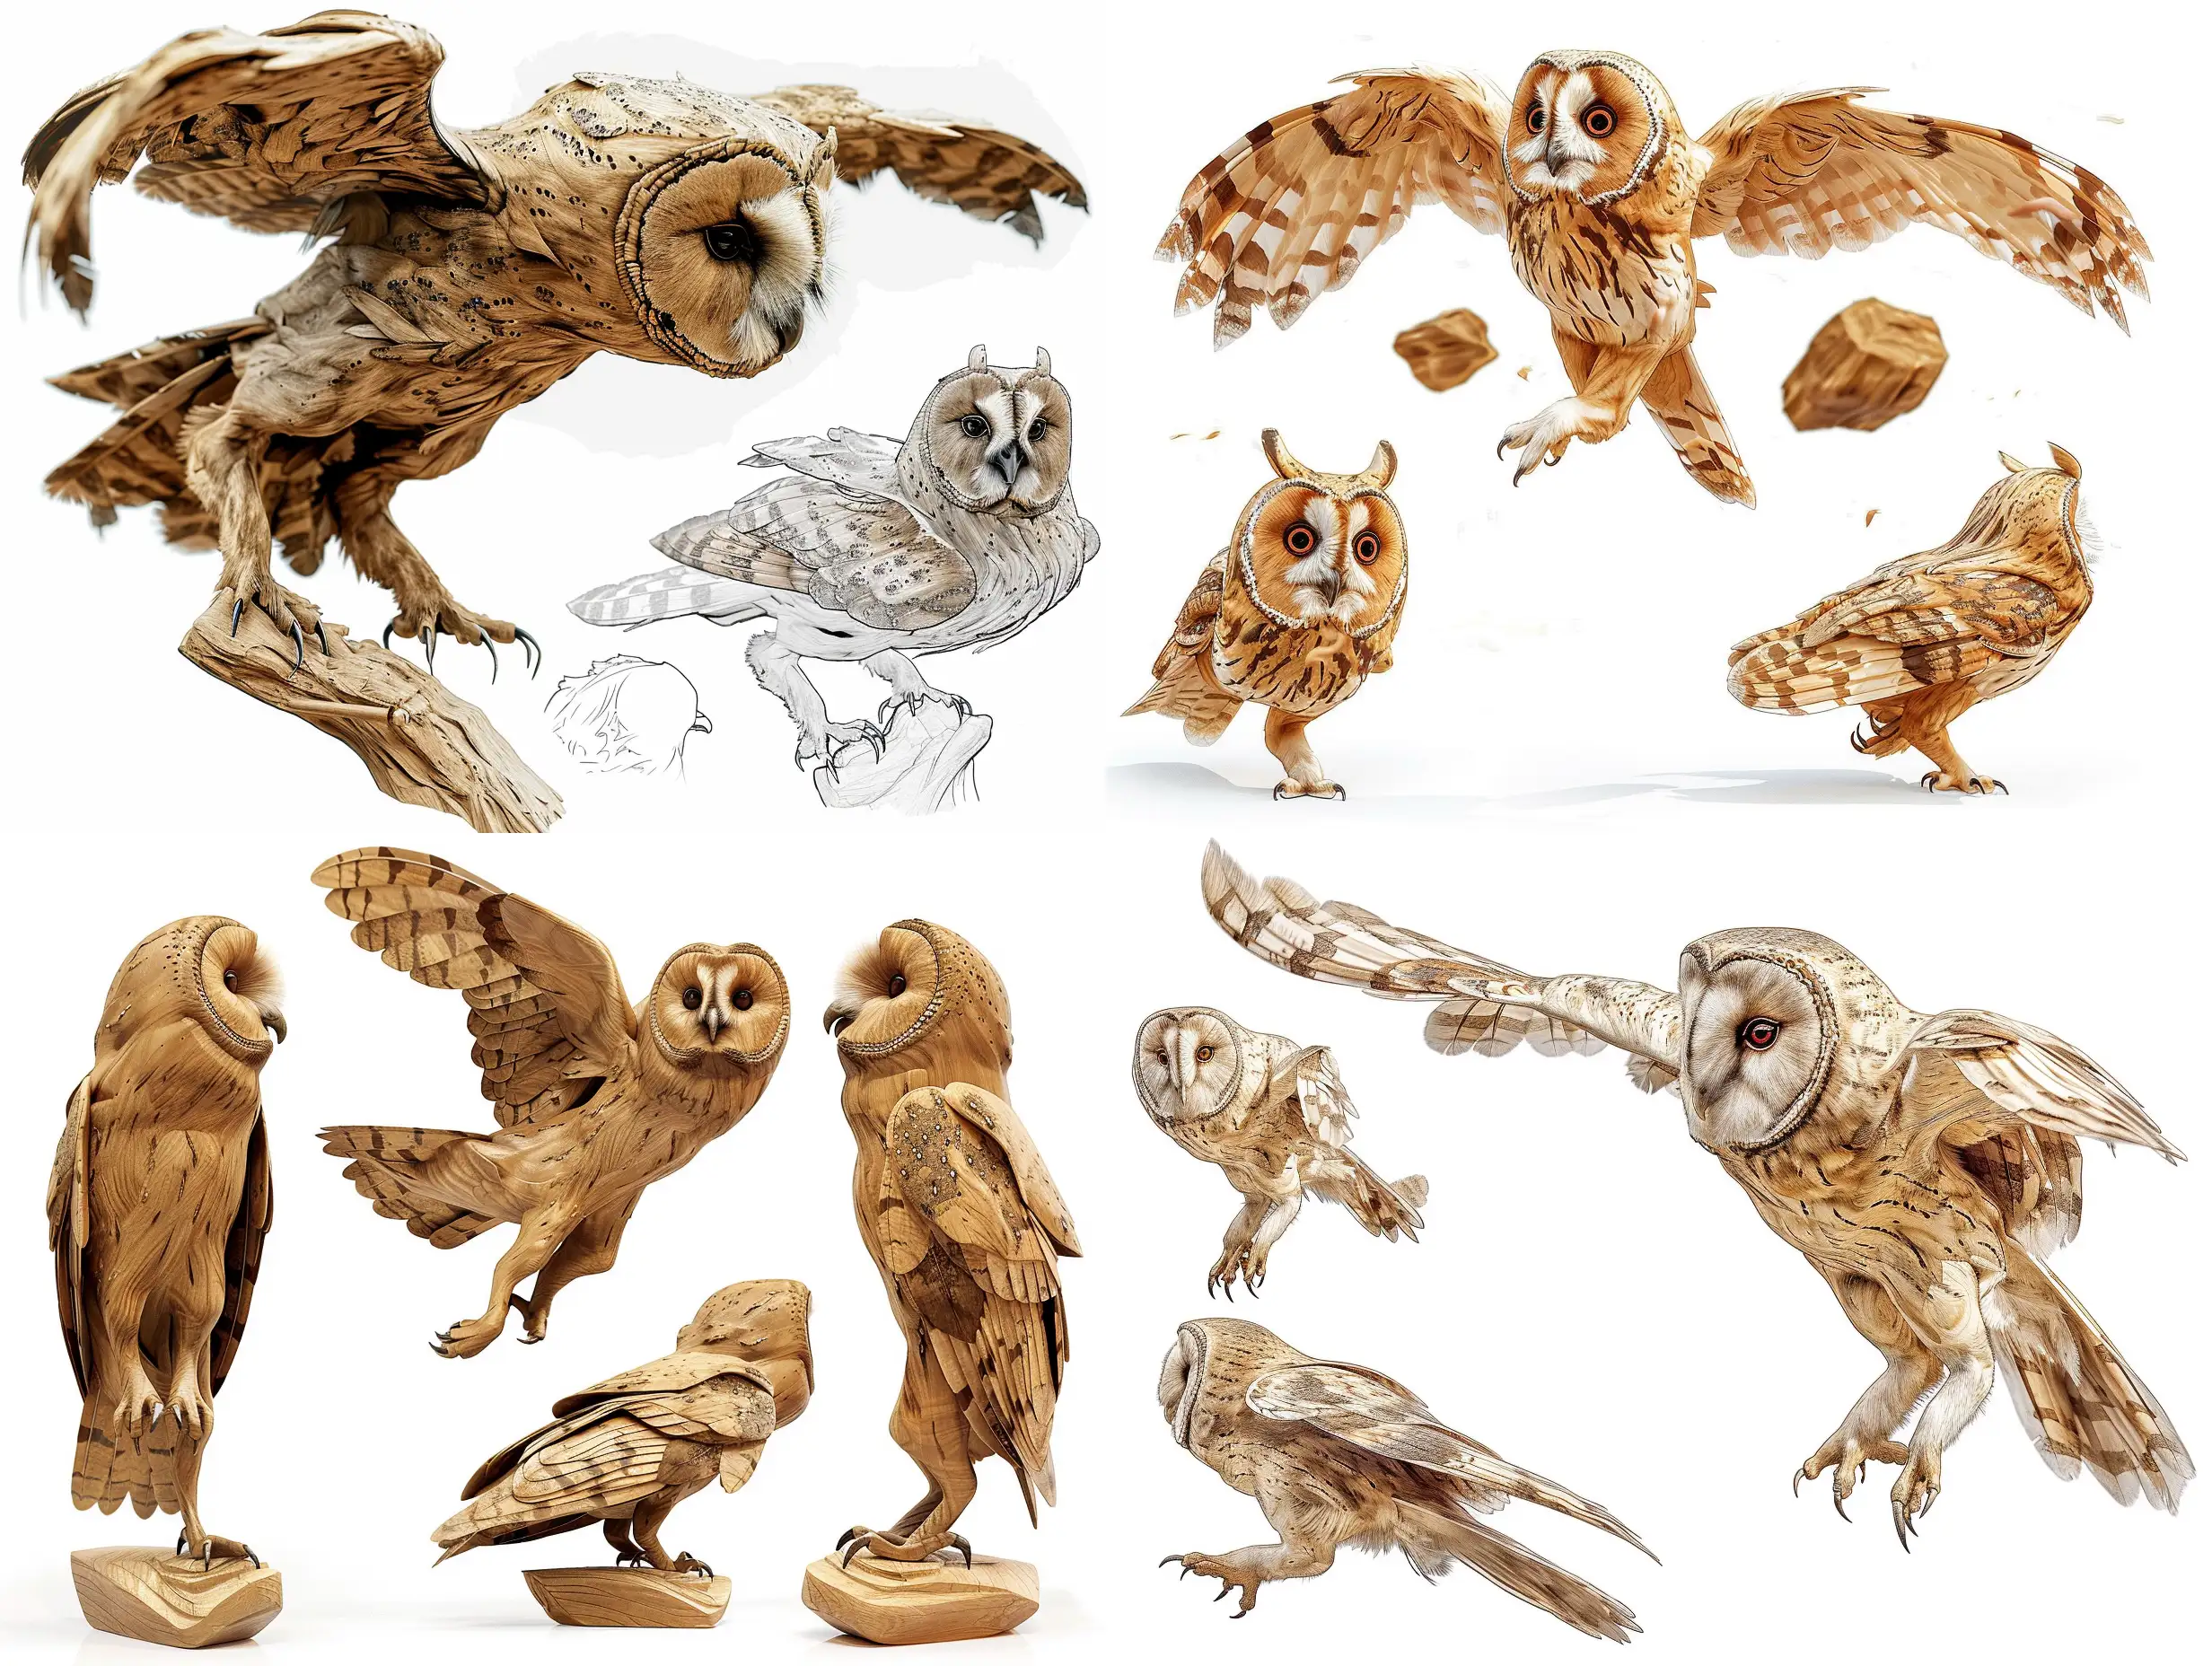 Realistic-Wooden-Owl-Sculpture-Jumping-in-Dynamic-Poses